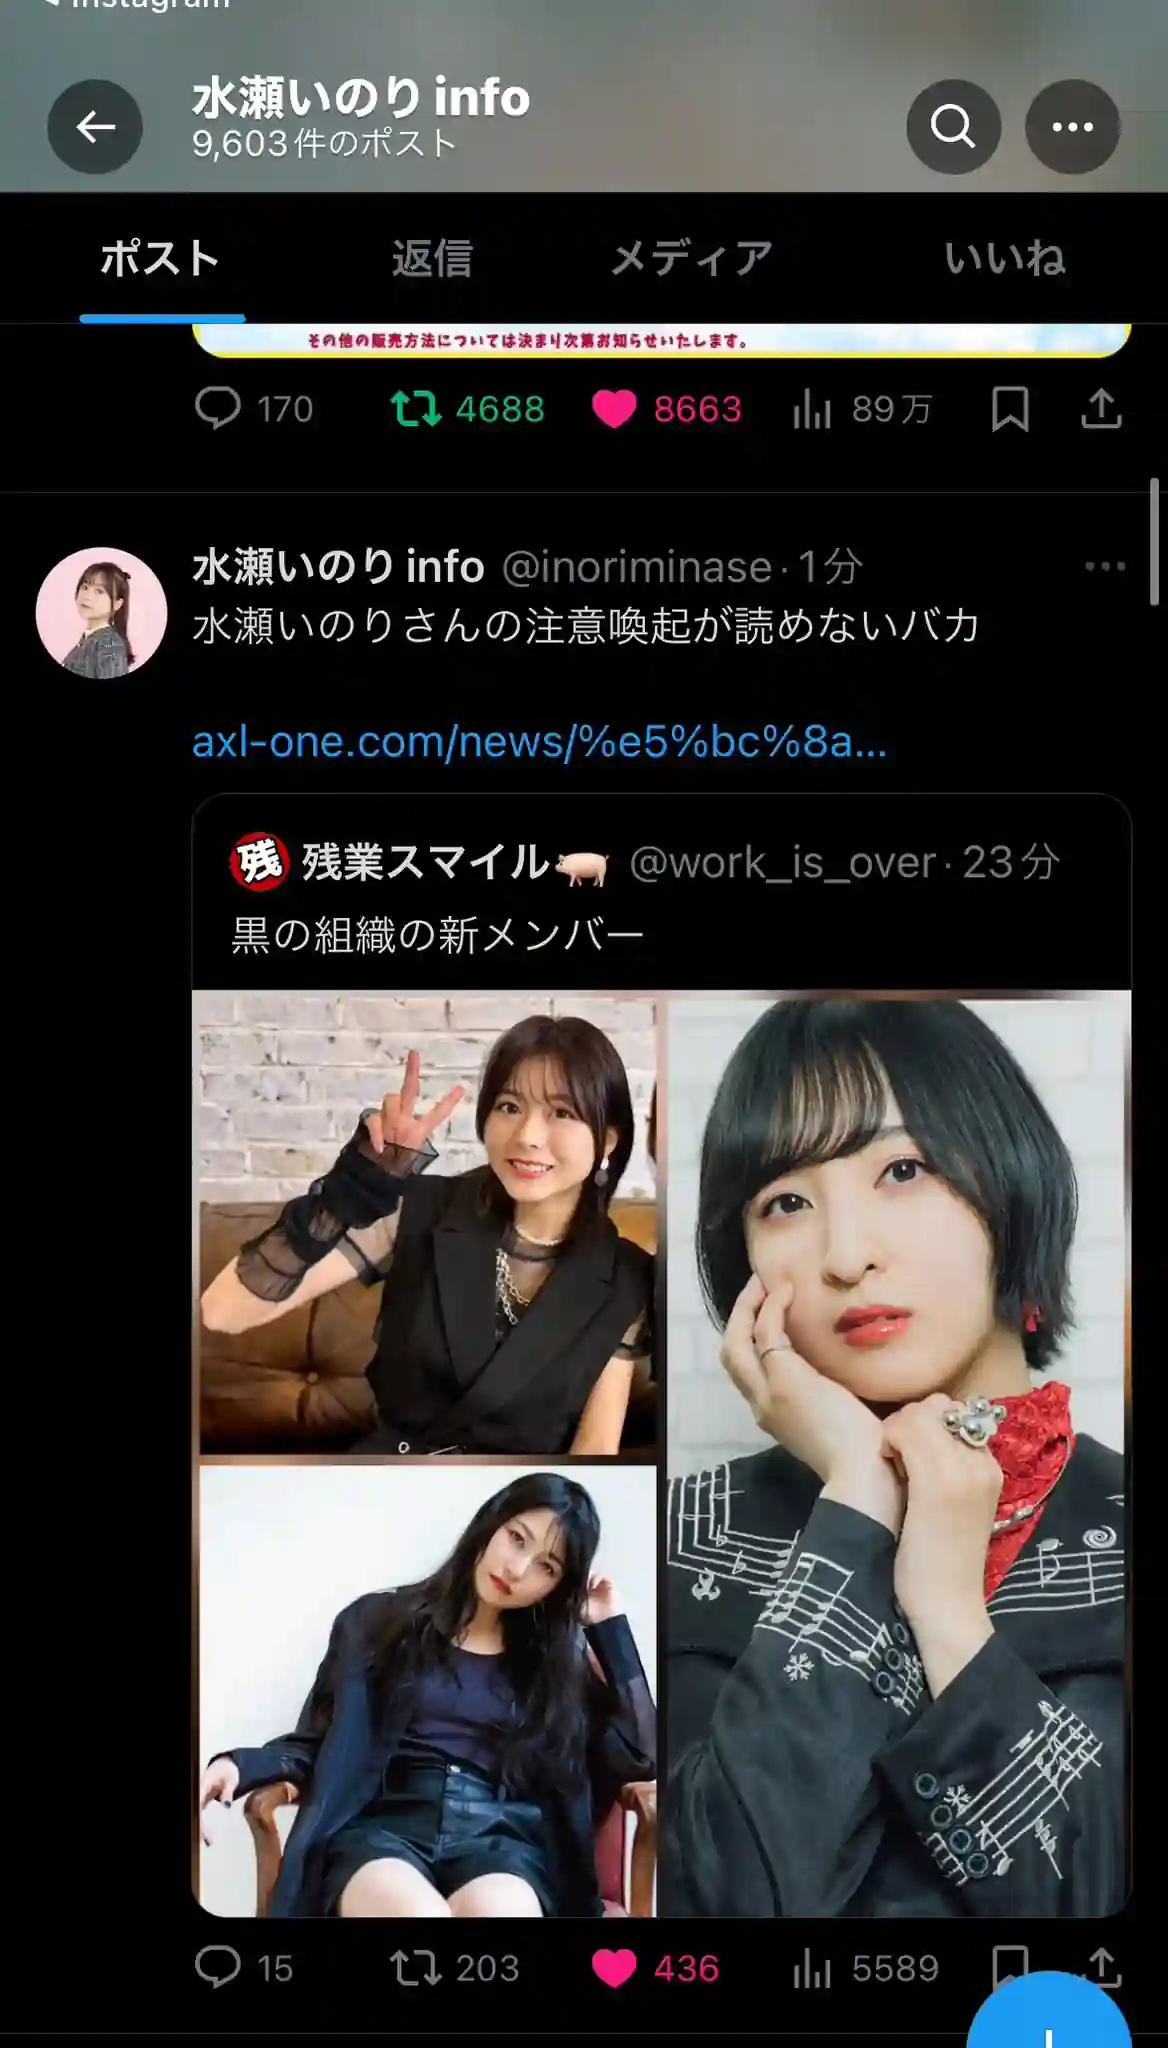 Rem's voice actress, Inori Minase, embroiled in Twitter Controversy